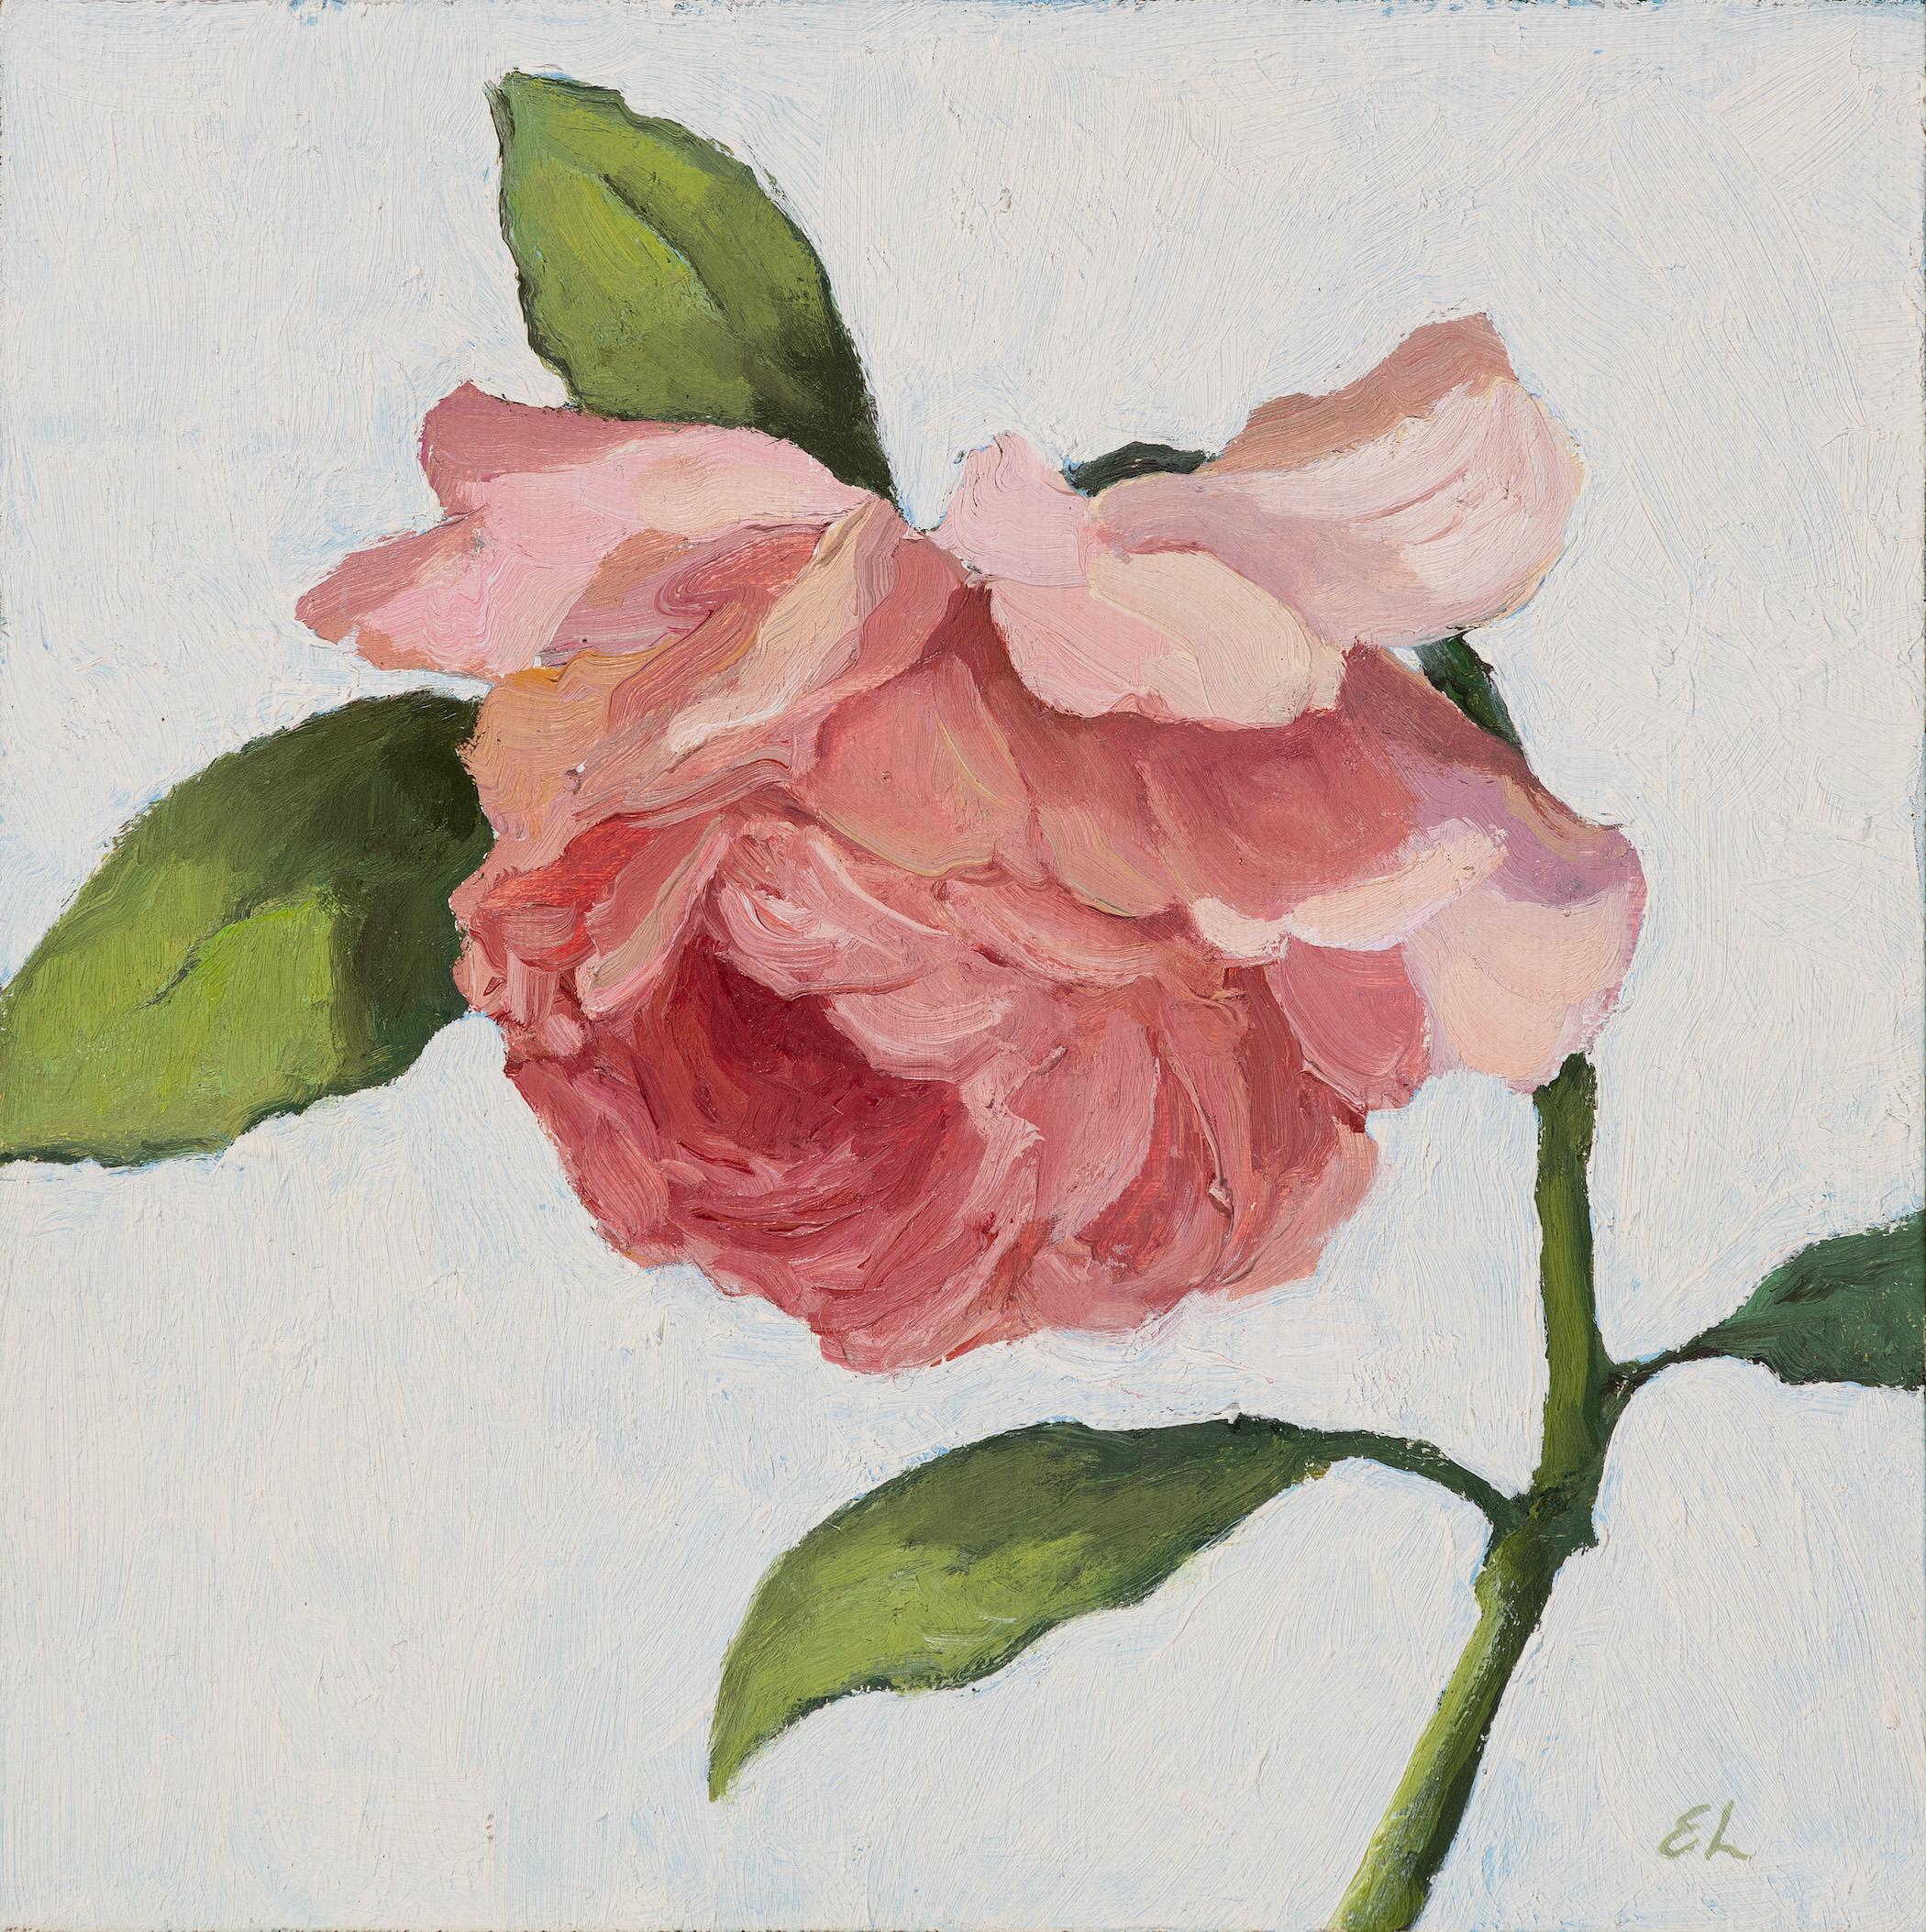 Edwina Lucas Portrait Painting - "Take a Bow" small realist oil painting of pink rose in simple floating frame